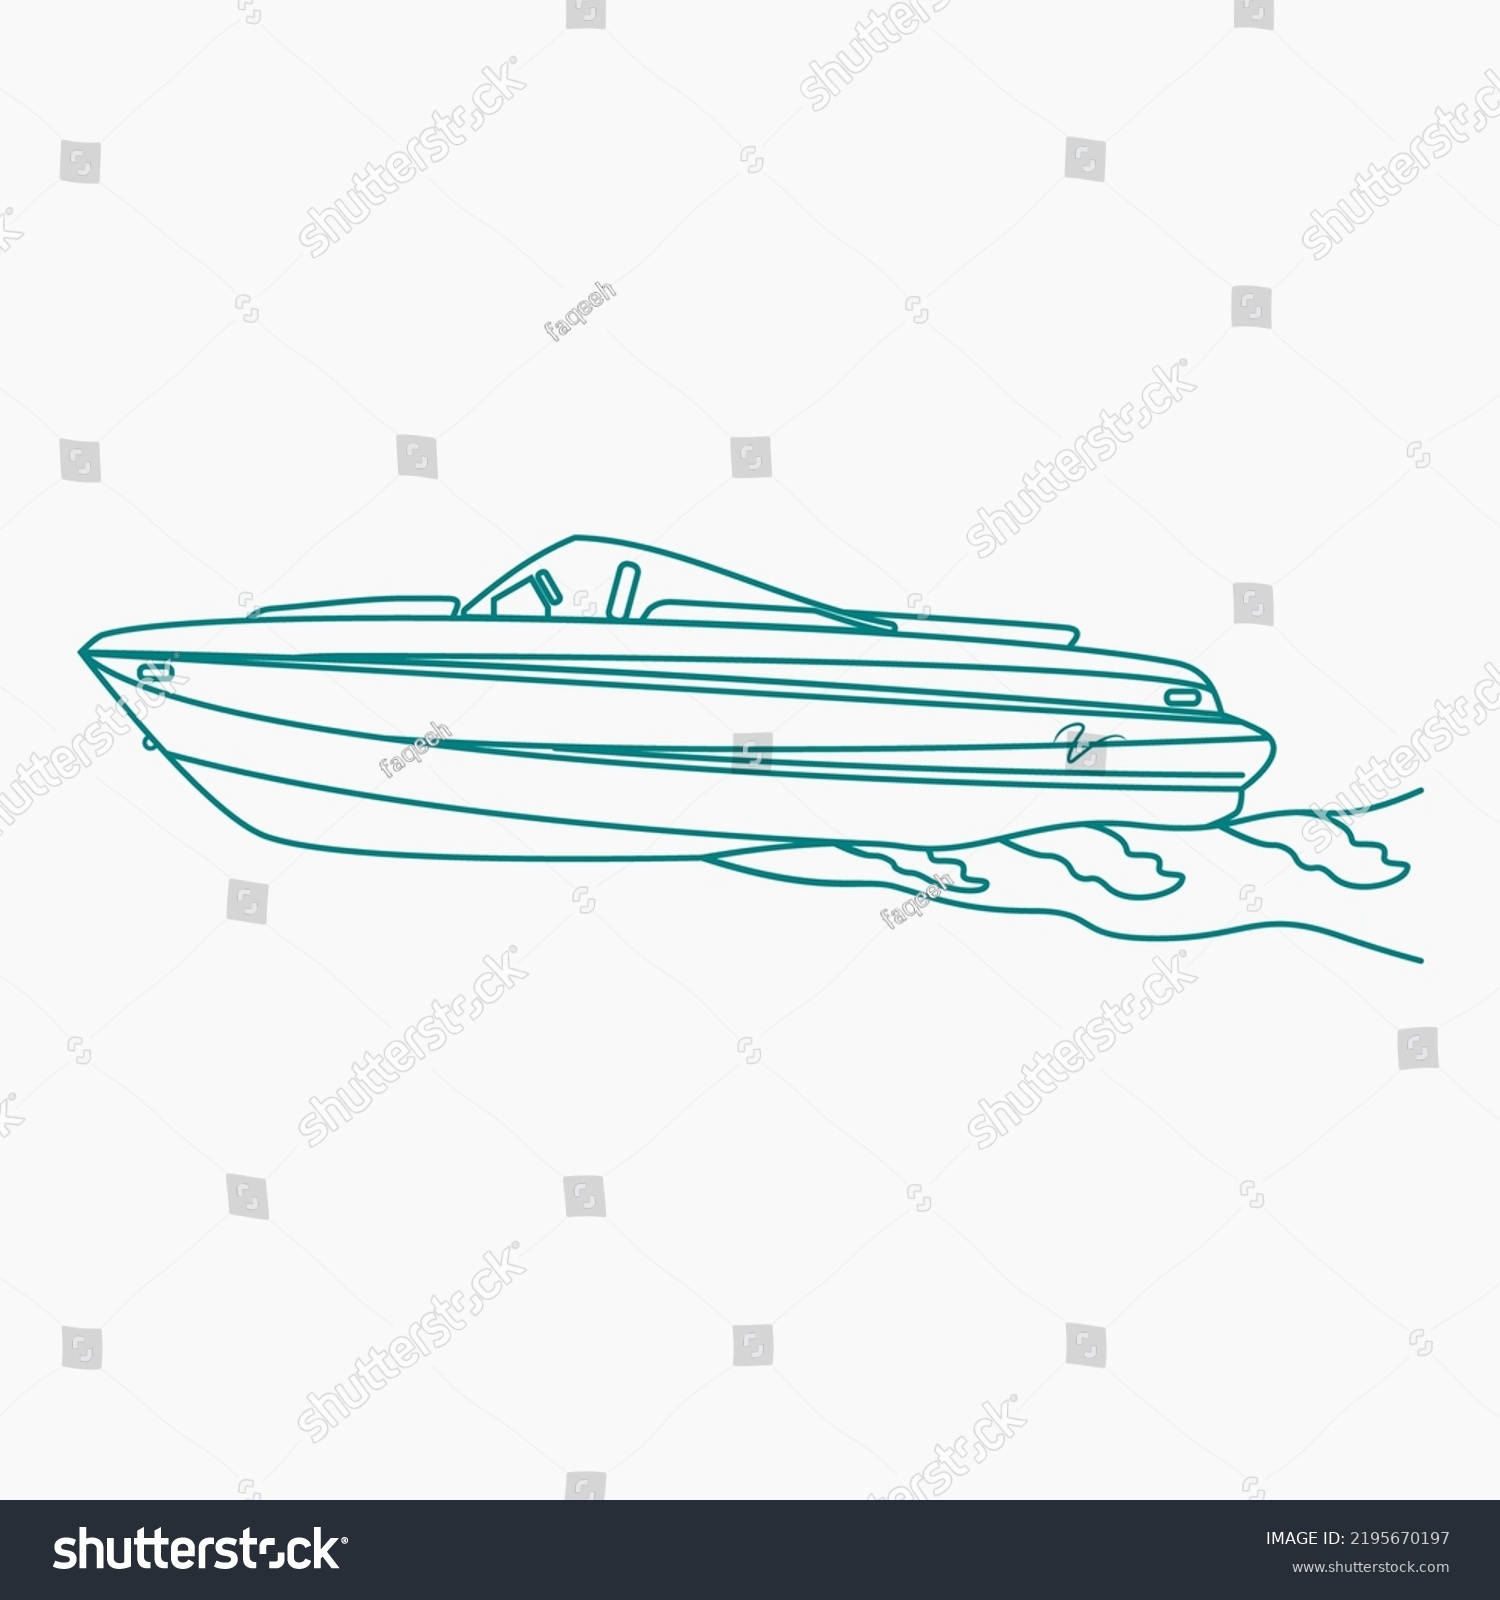 SVG of Editable Side View American Bowrider Boat on Water Vector Illustration in Outline Style for Artwork Element of Transportation or Recreation Related Design svg